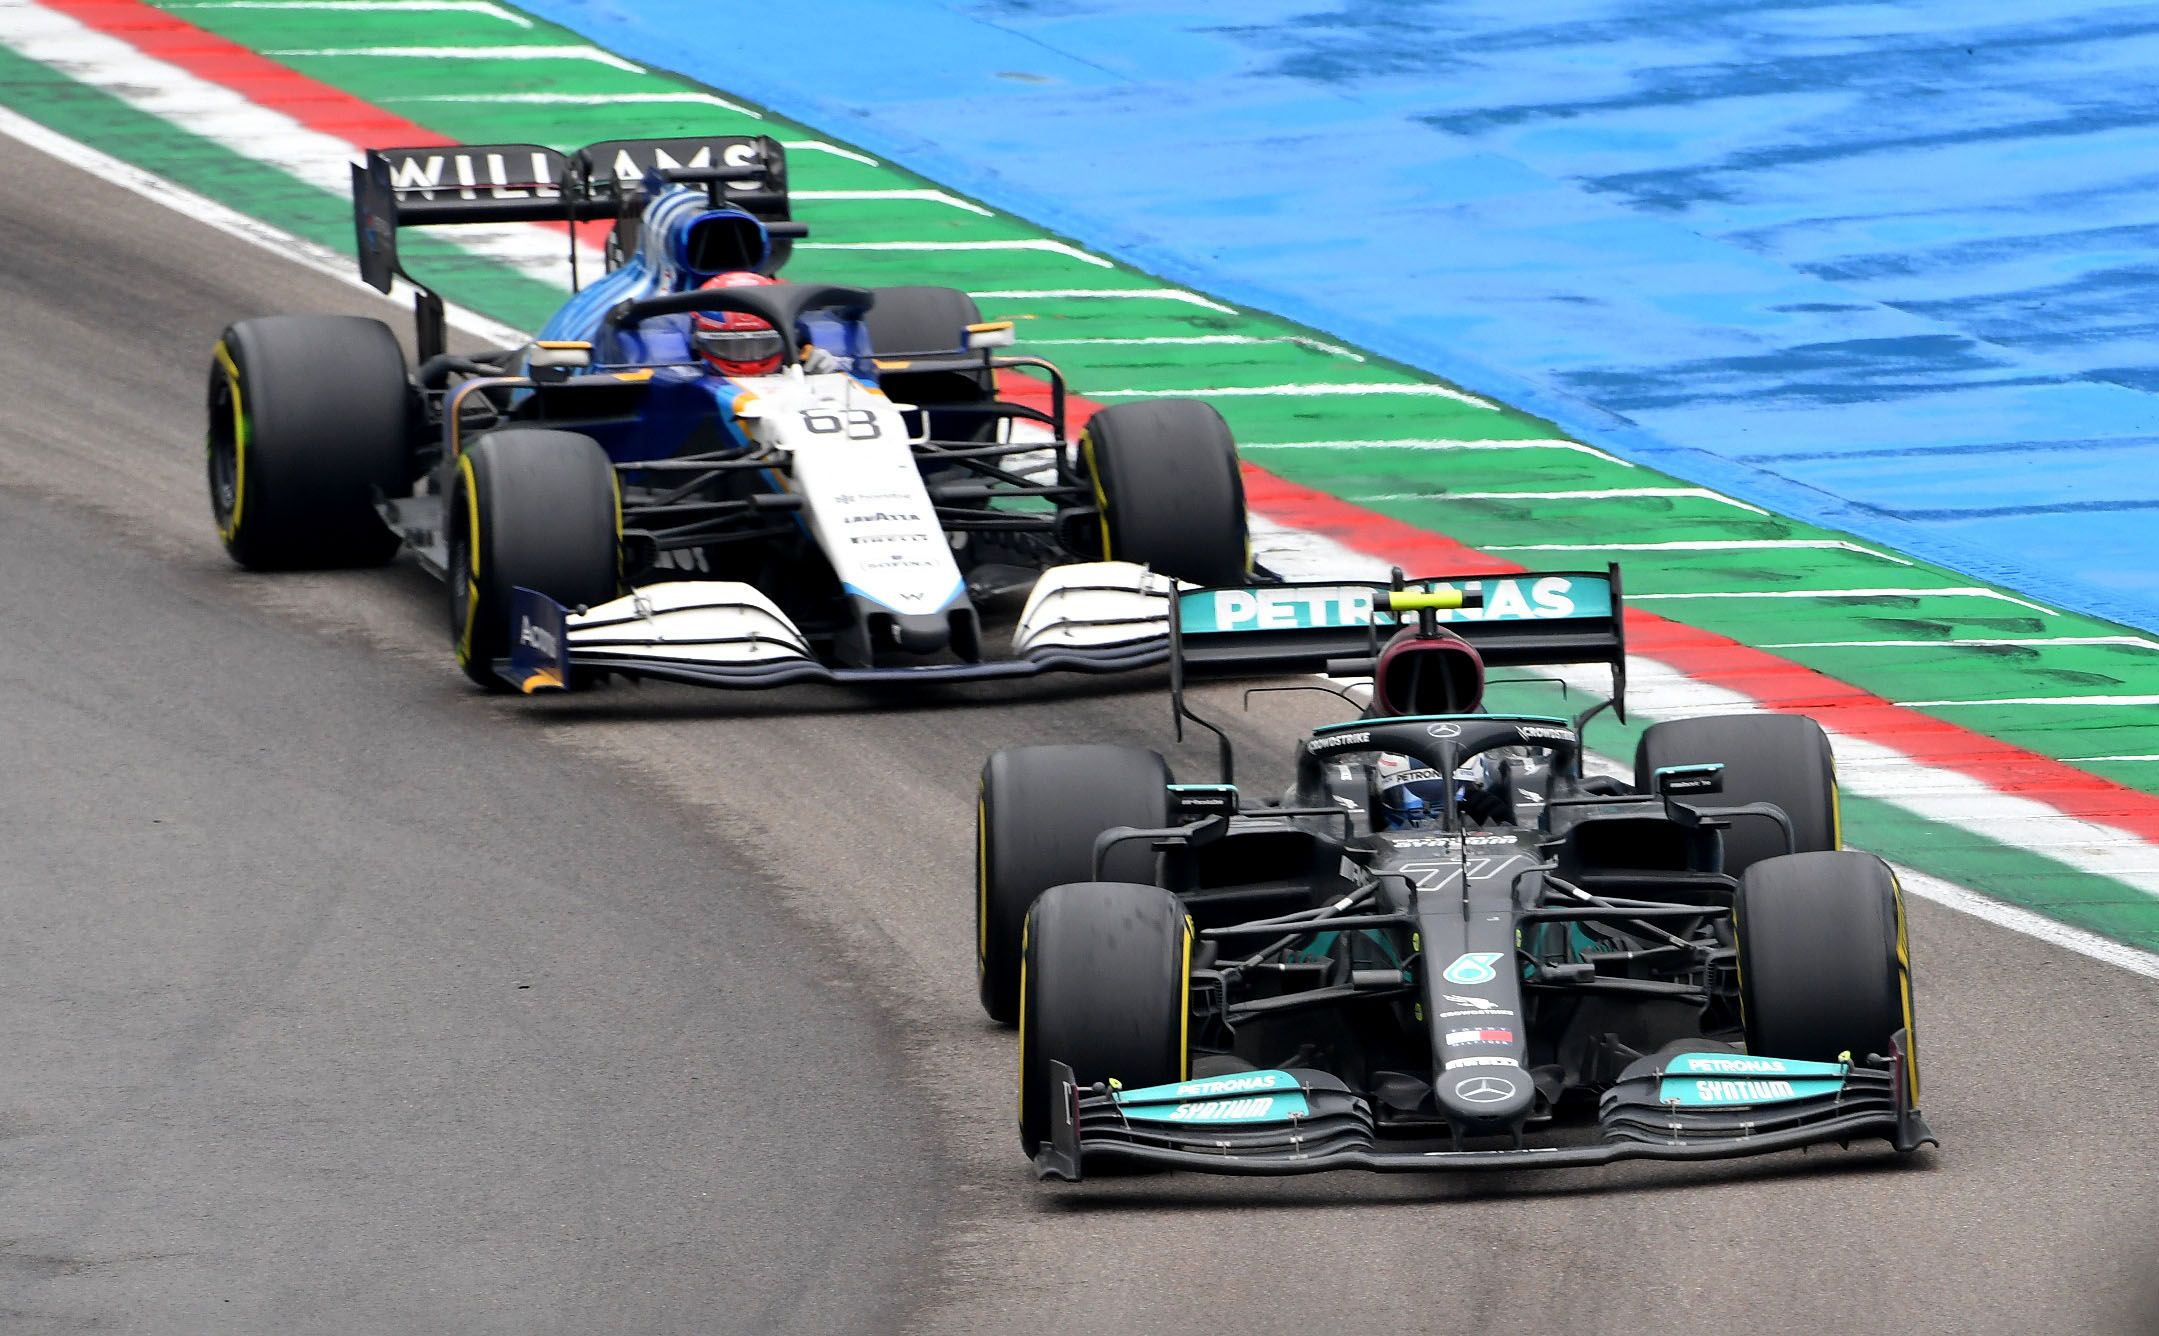 Russell closes in on Bottas in 2021.